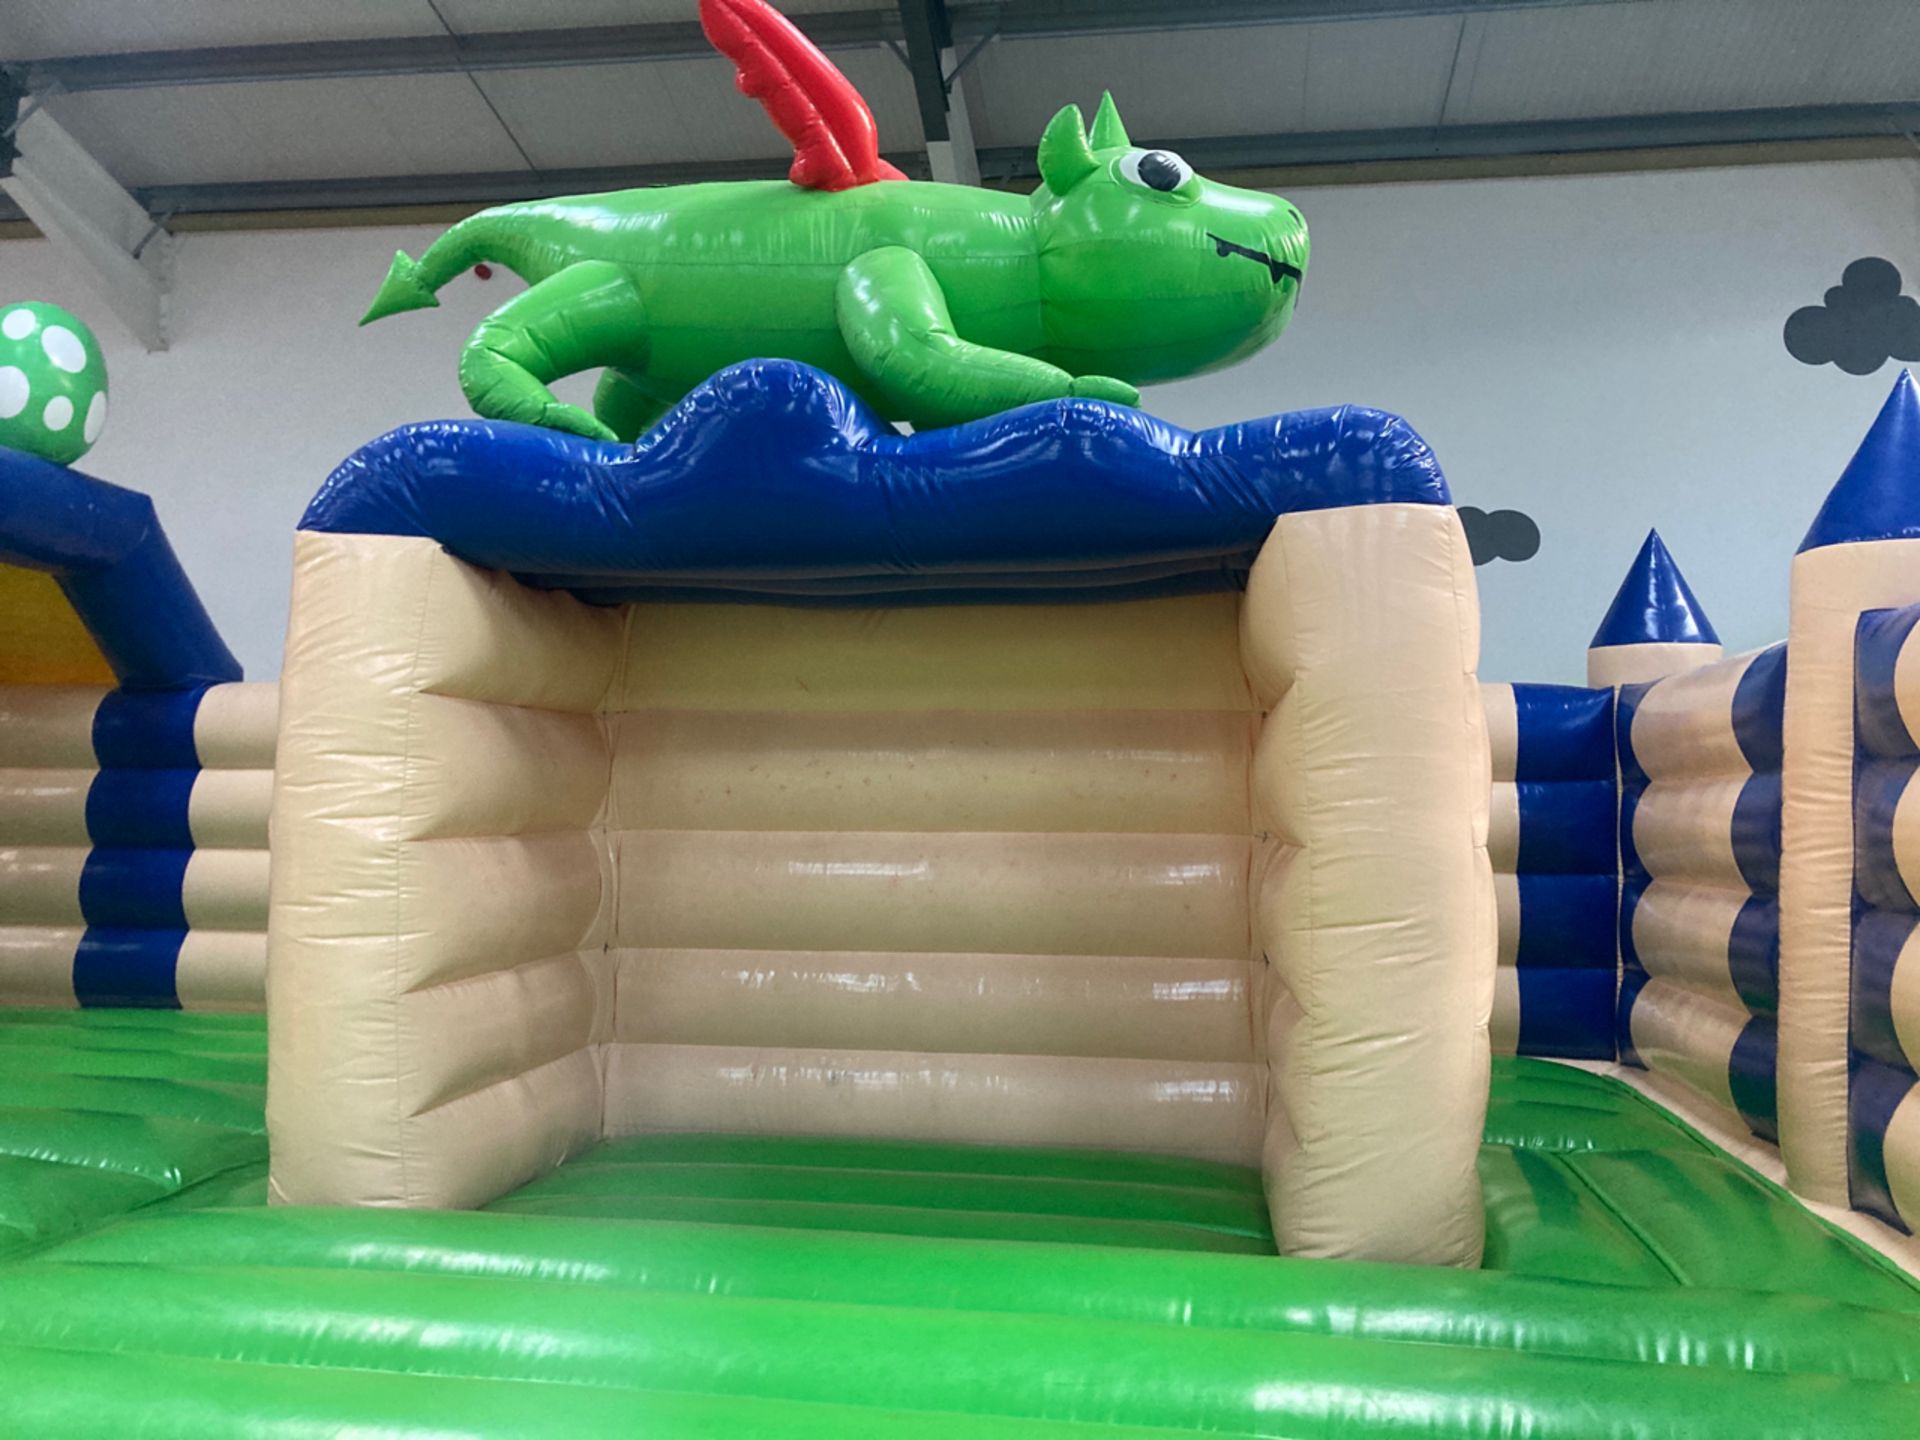 Inflatable bouncy castle - Image 8 of 22